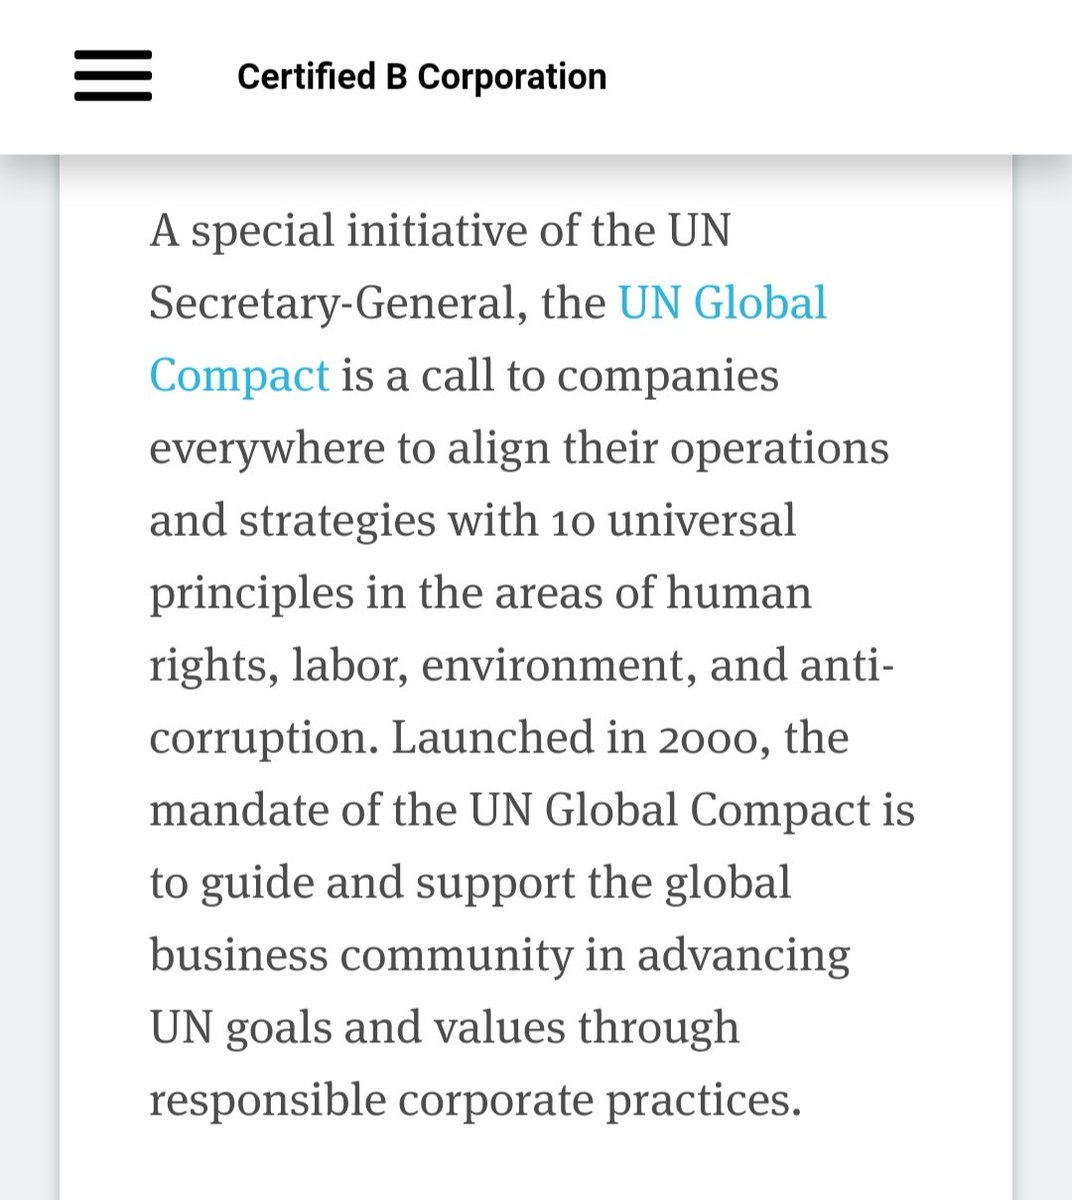 29) Beyond the seemingly innocent description, B-Corp is a way to ensure that businesses, from local startups to multinational corporations, adhere to the UN's Sustainable Development Goals set out in their Agenda 2030 program.